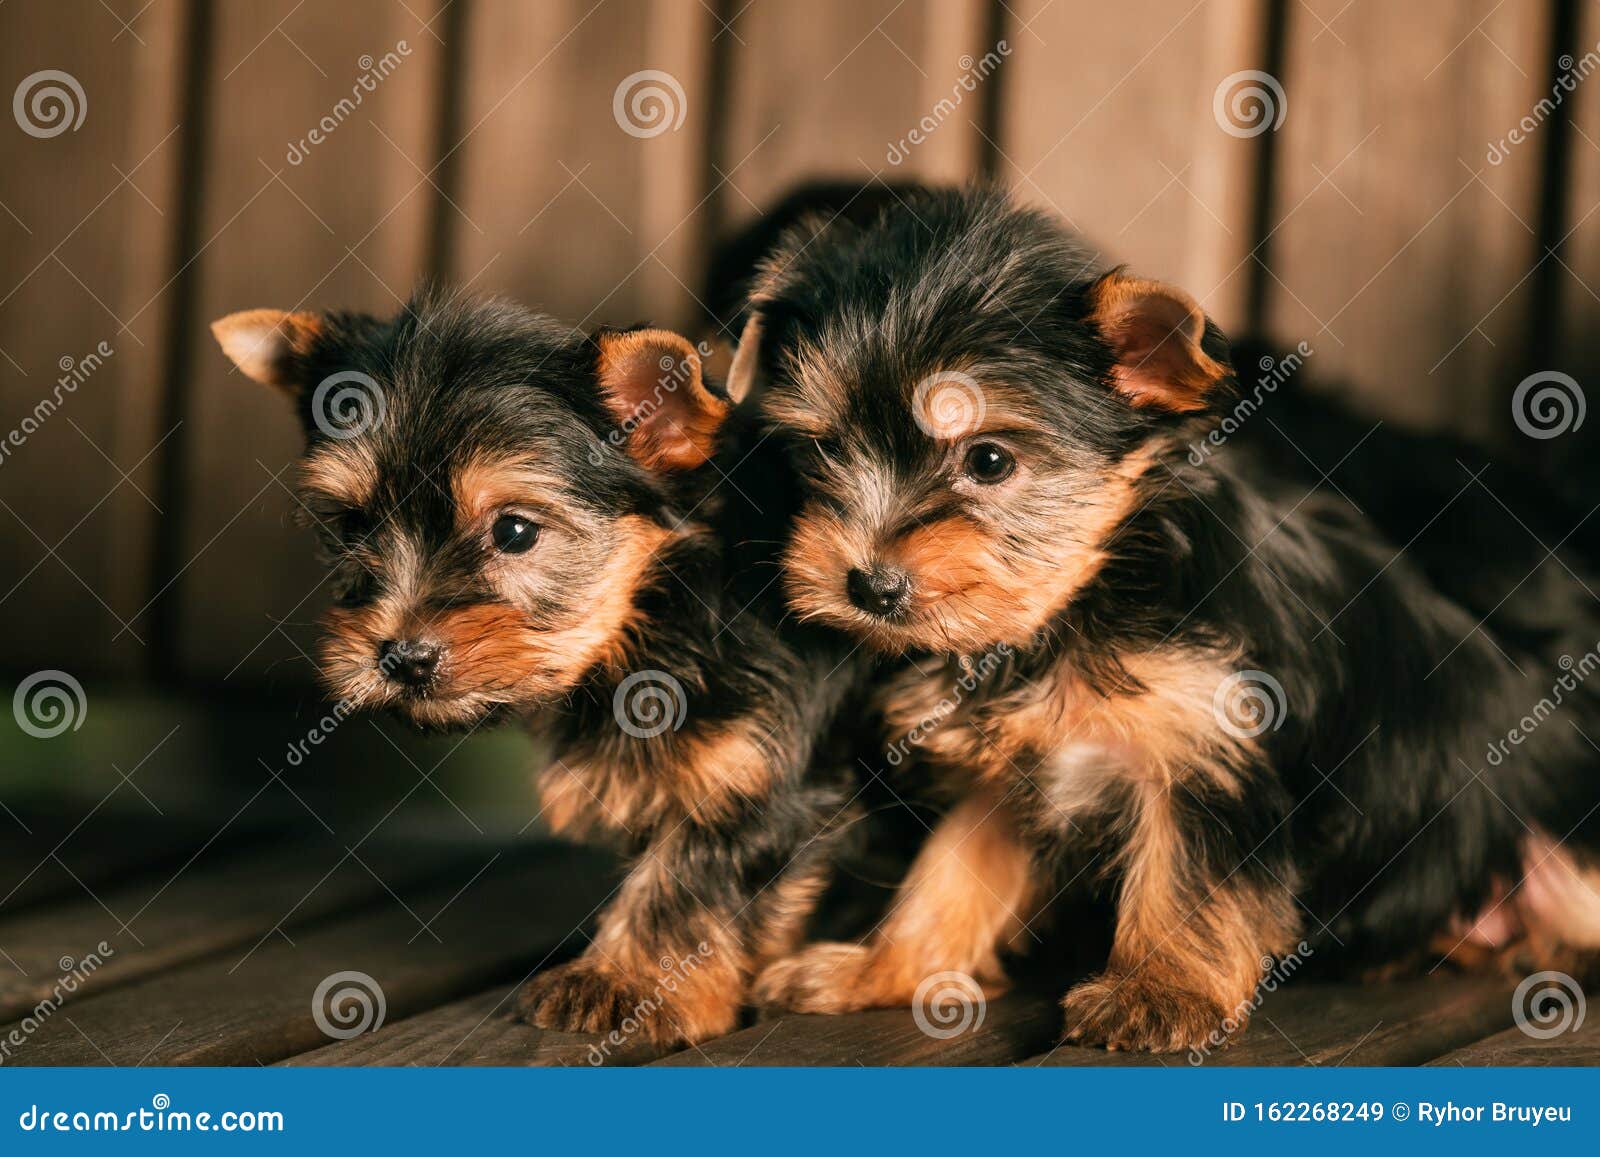 small yorkie puppies